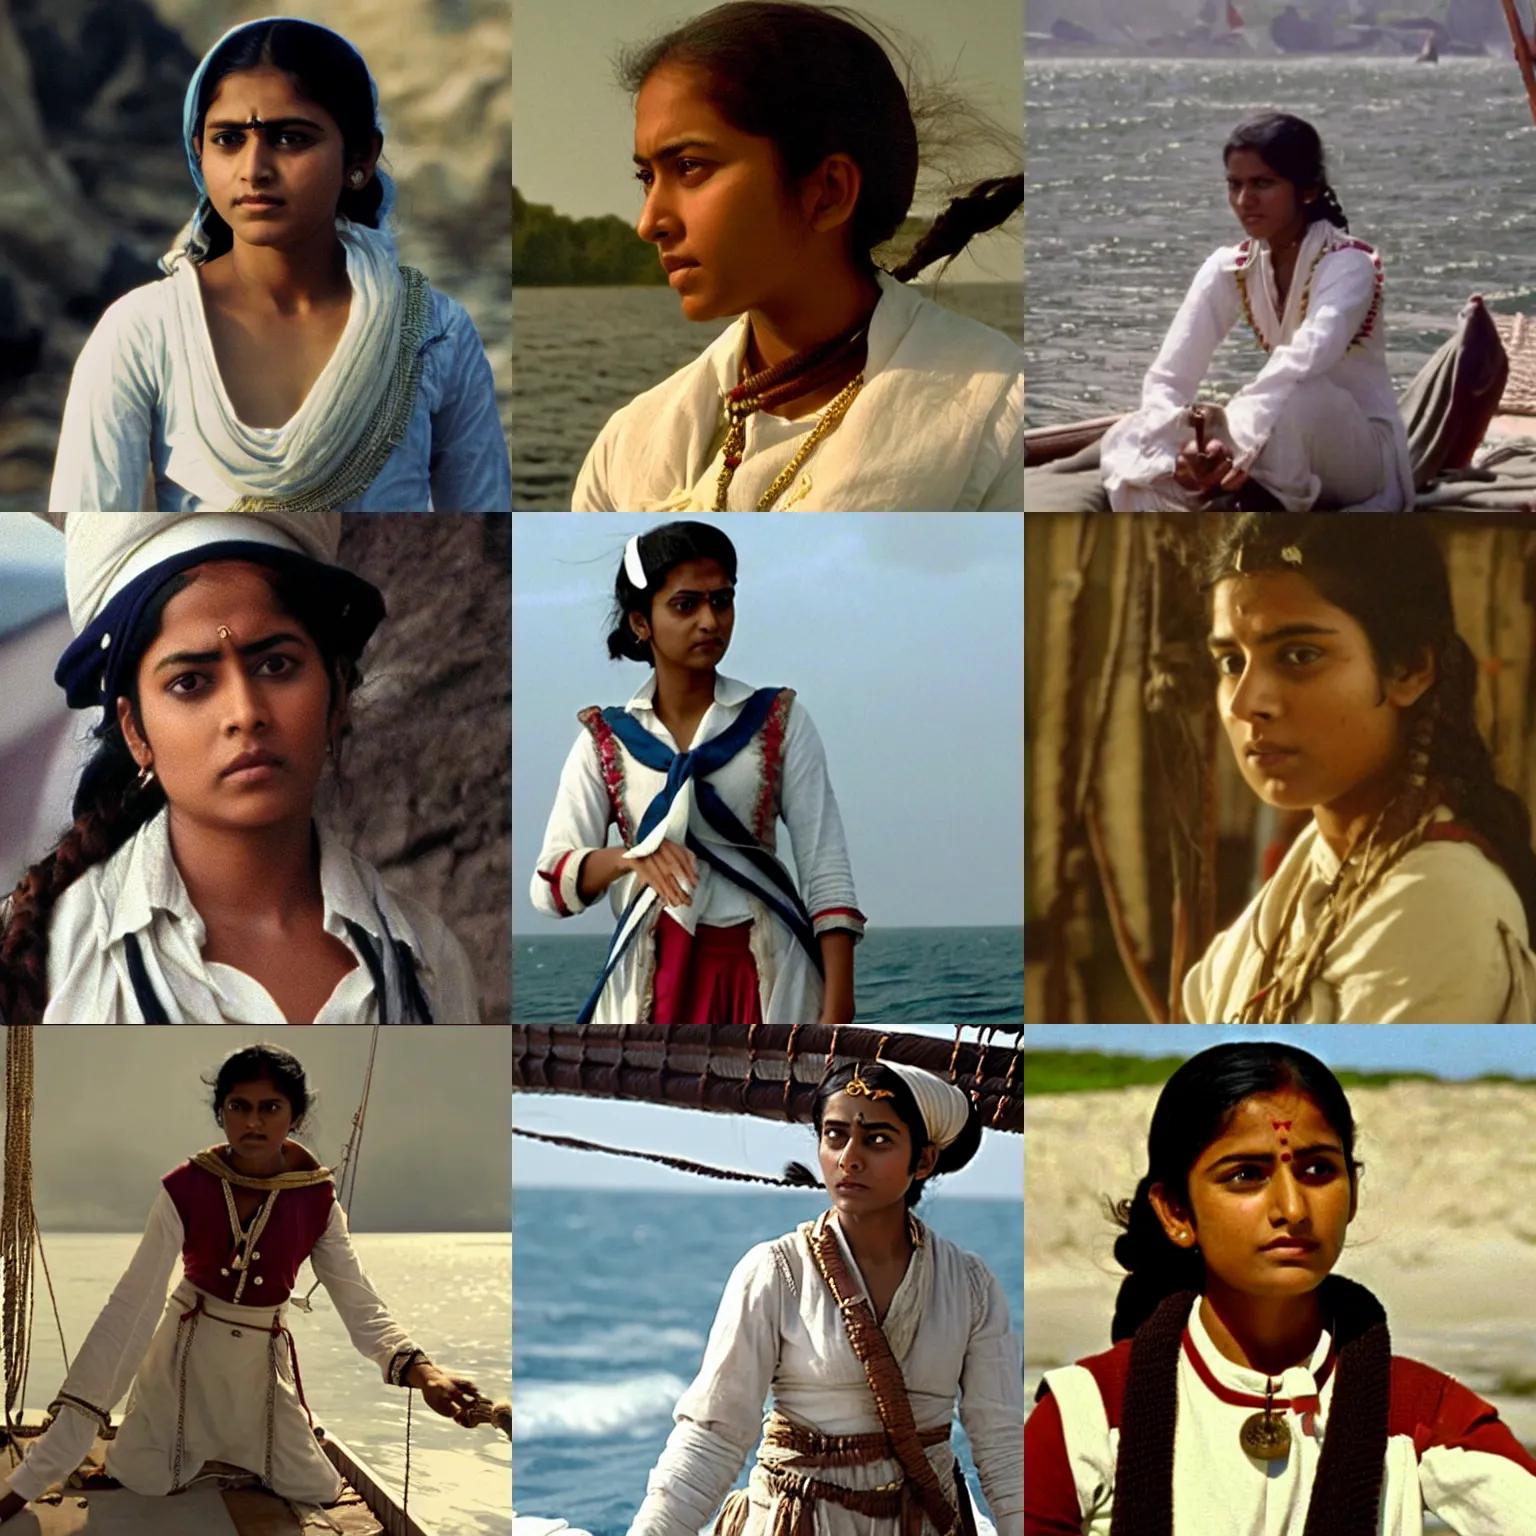 Prompt: Young Indian woman sailor captain, film still from the movie \'Master and Commander\'